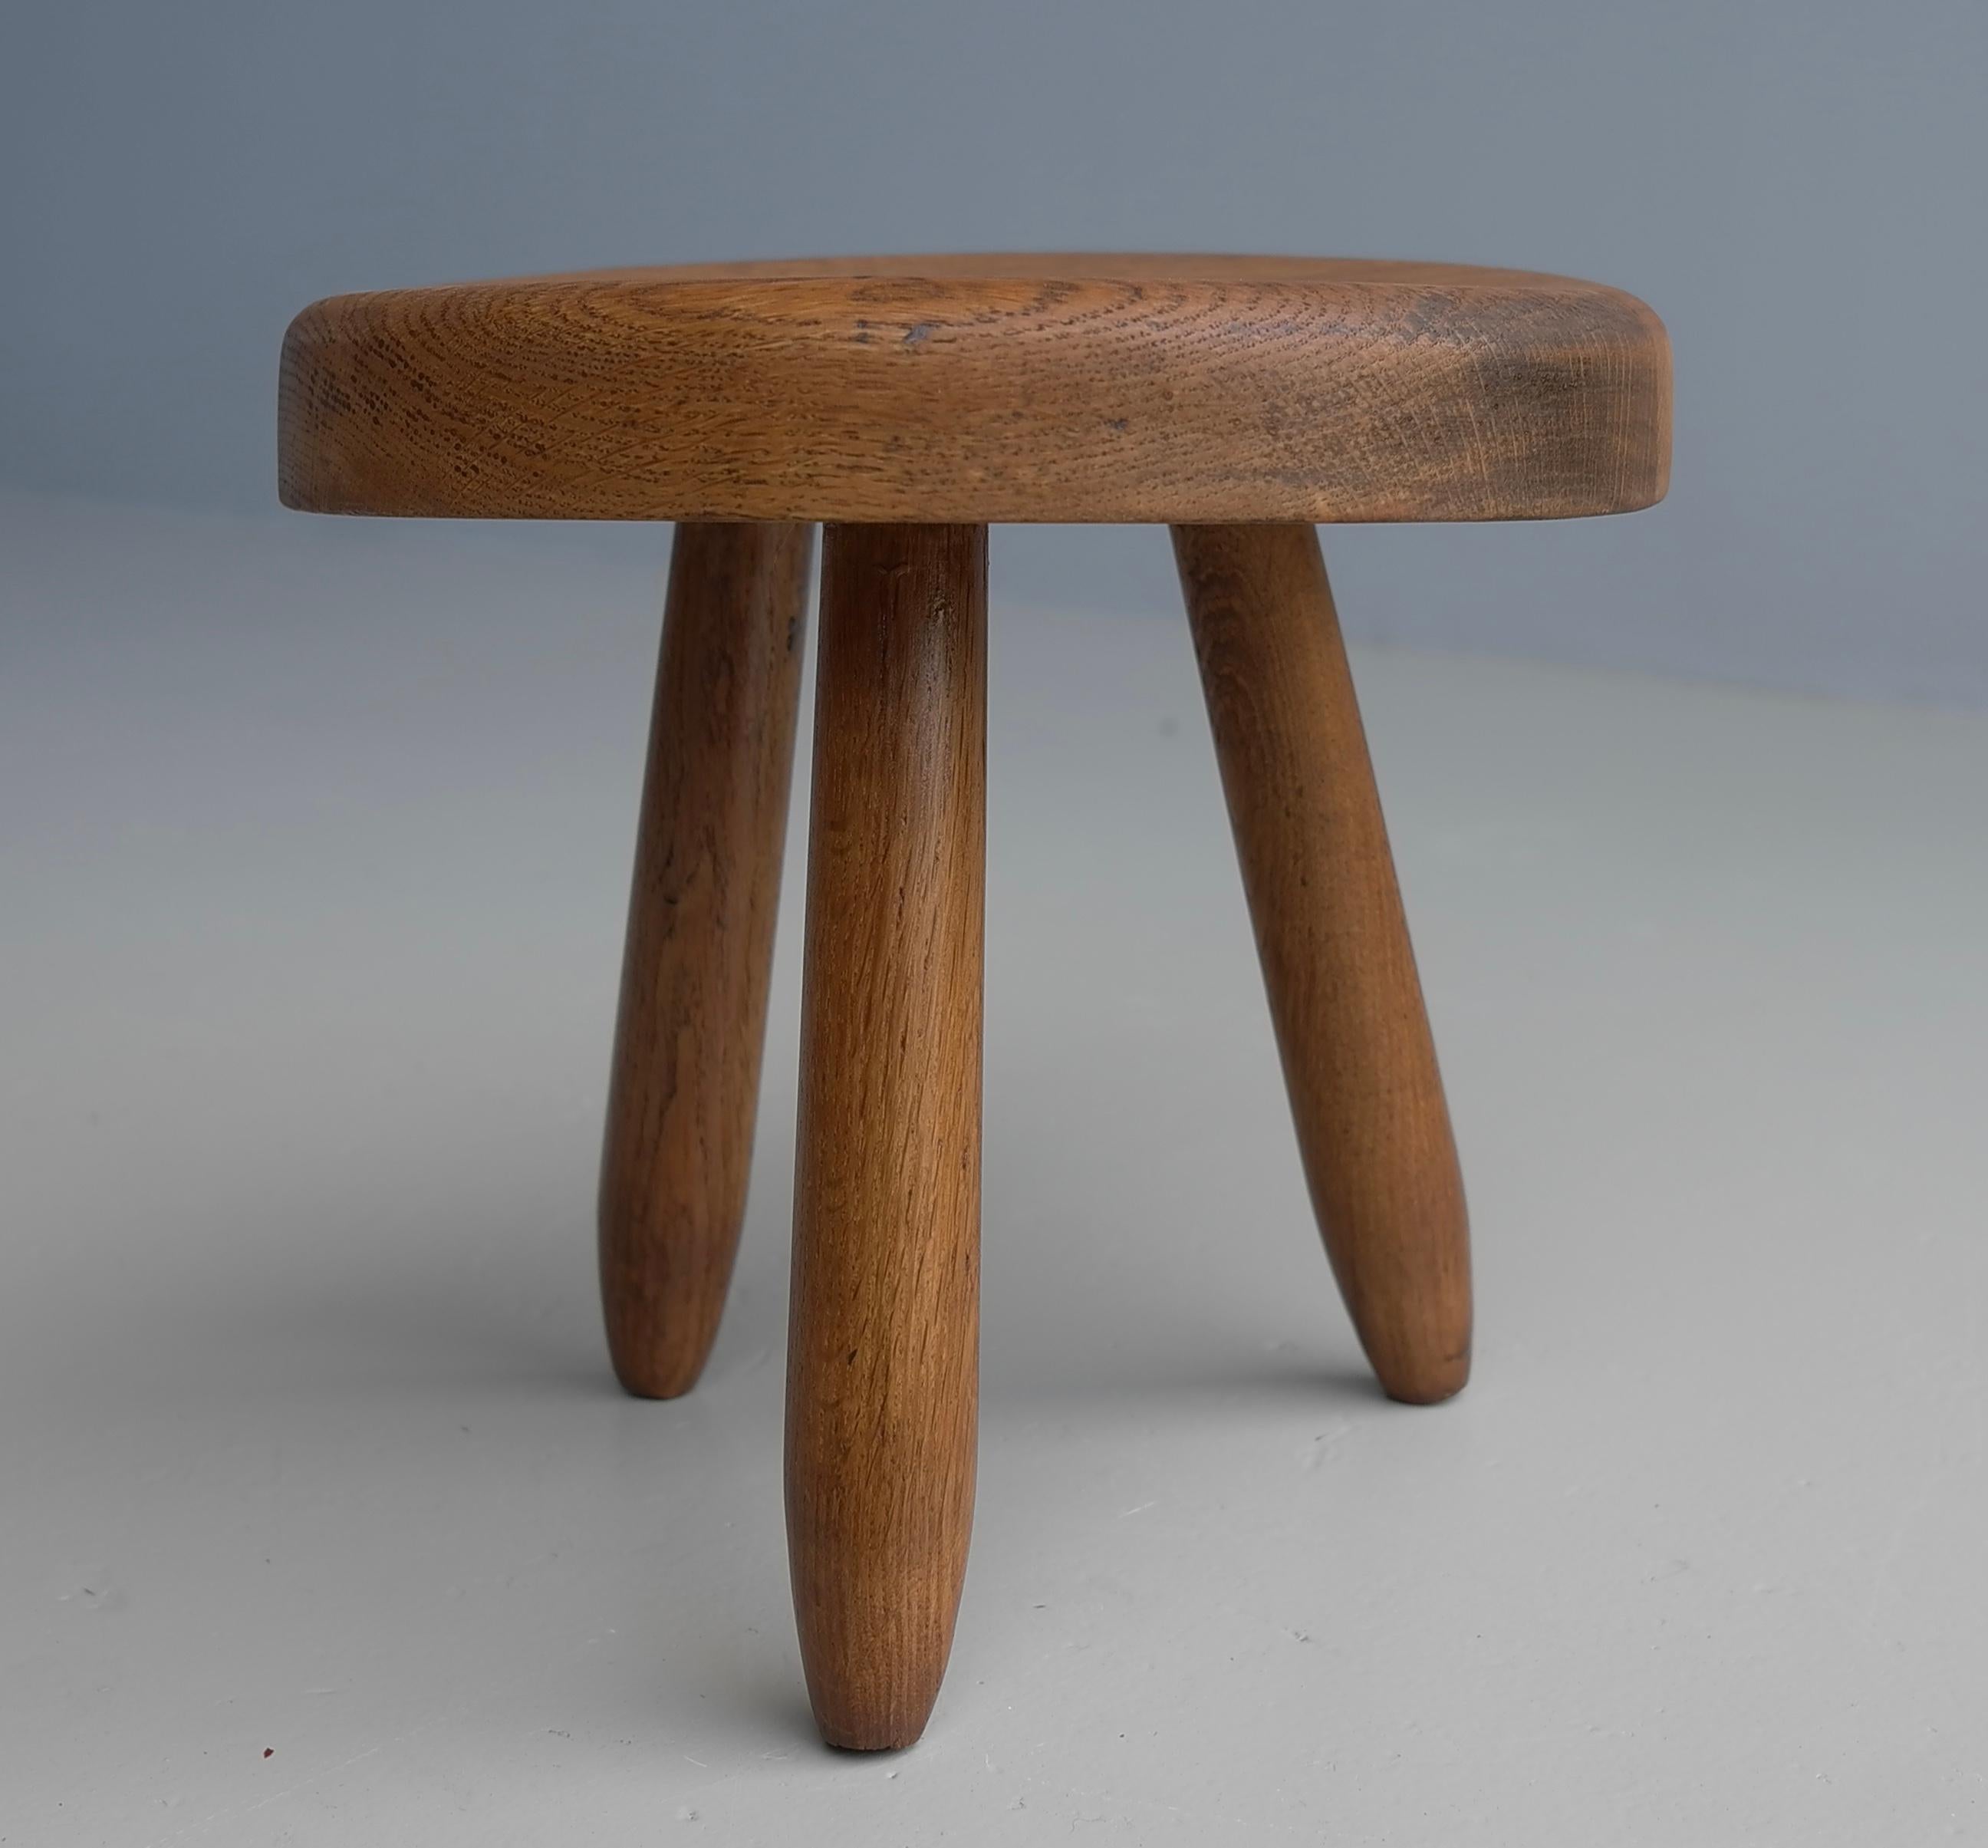 Solid Oak ' Berger' Stool in Style of Charlotte Perriand, France, 1950's For Sale 1